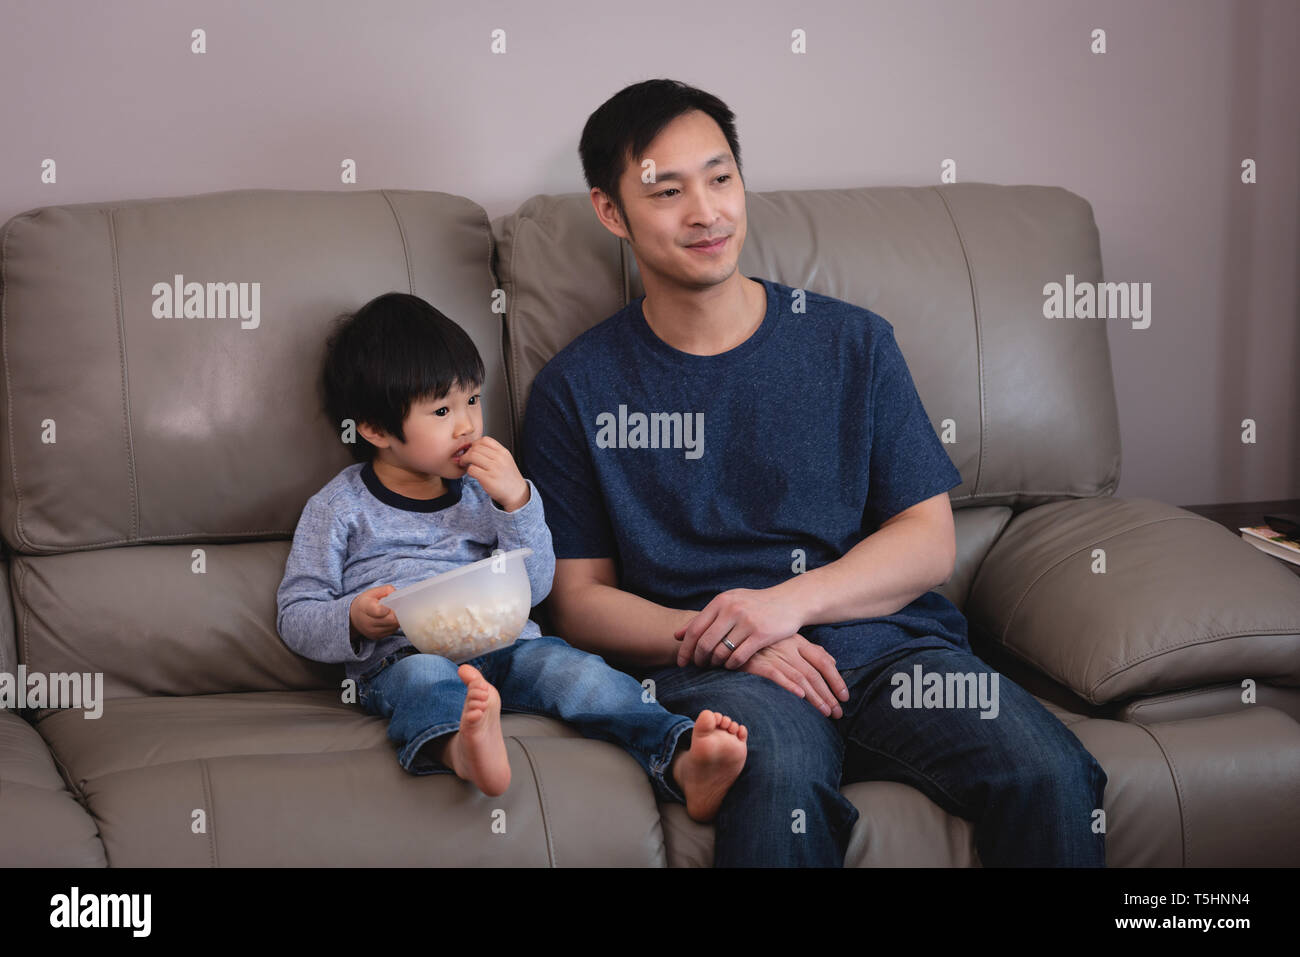 Father and son sitting on sofa at home Stock Photo